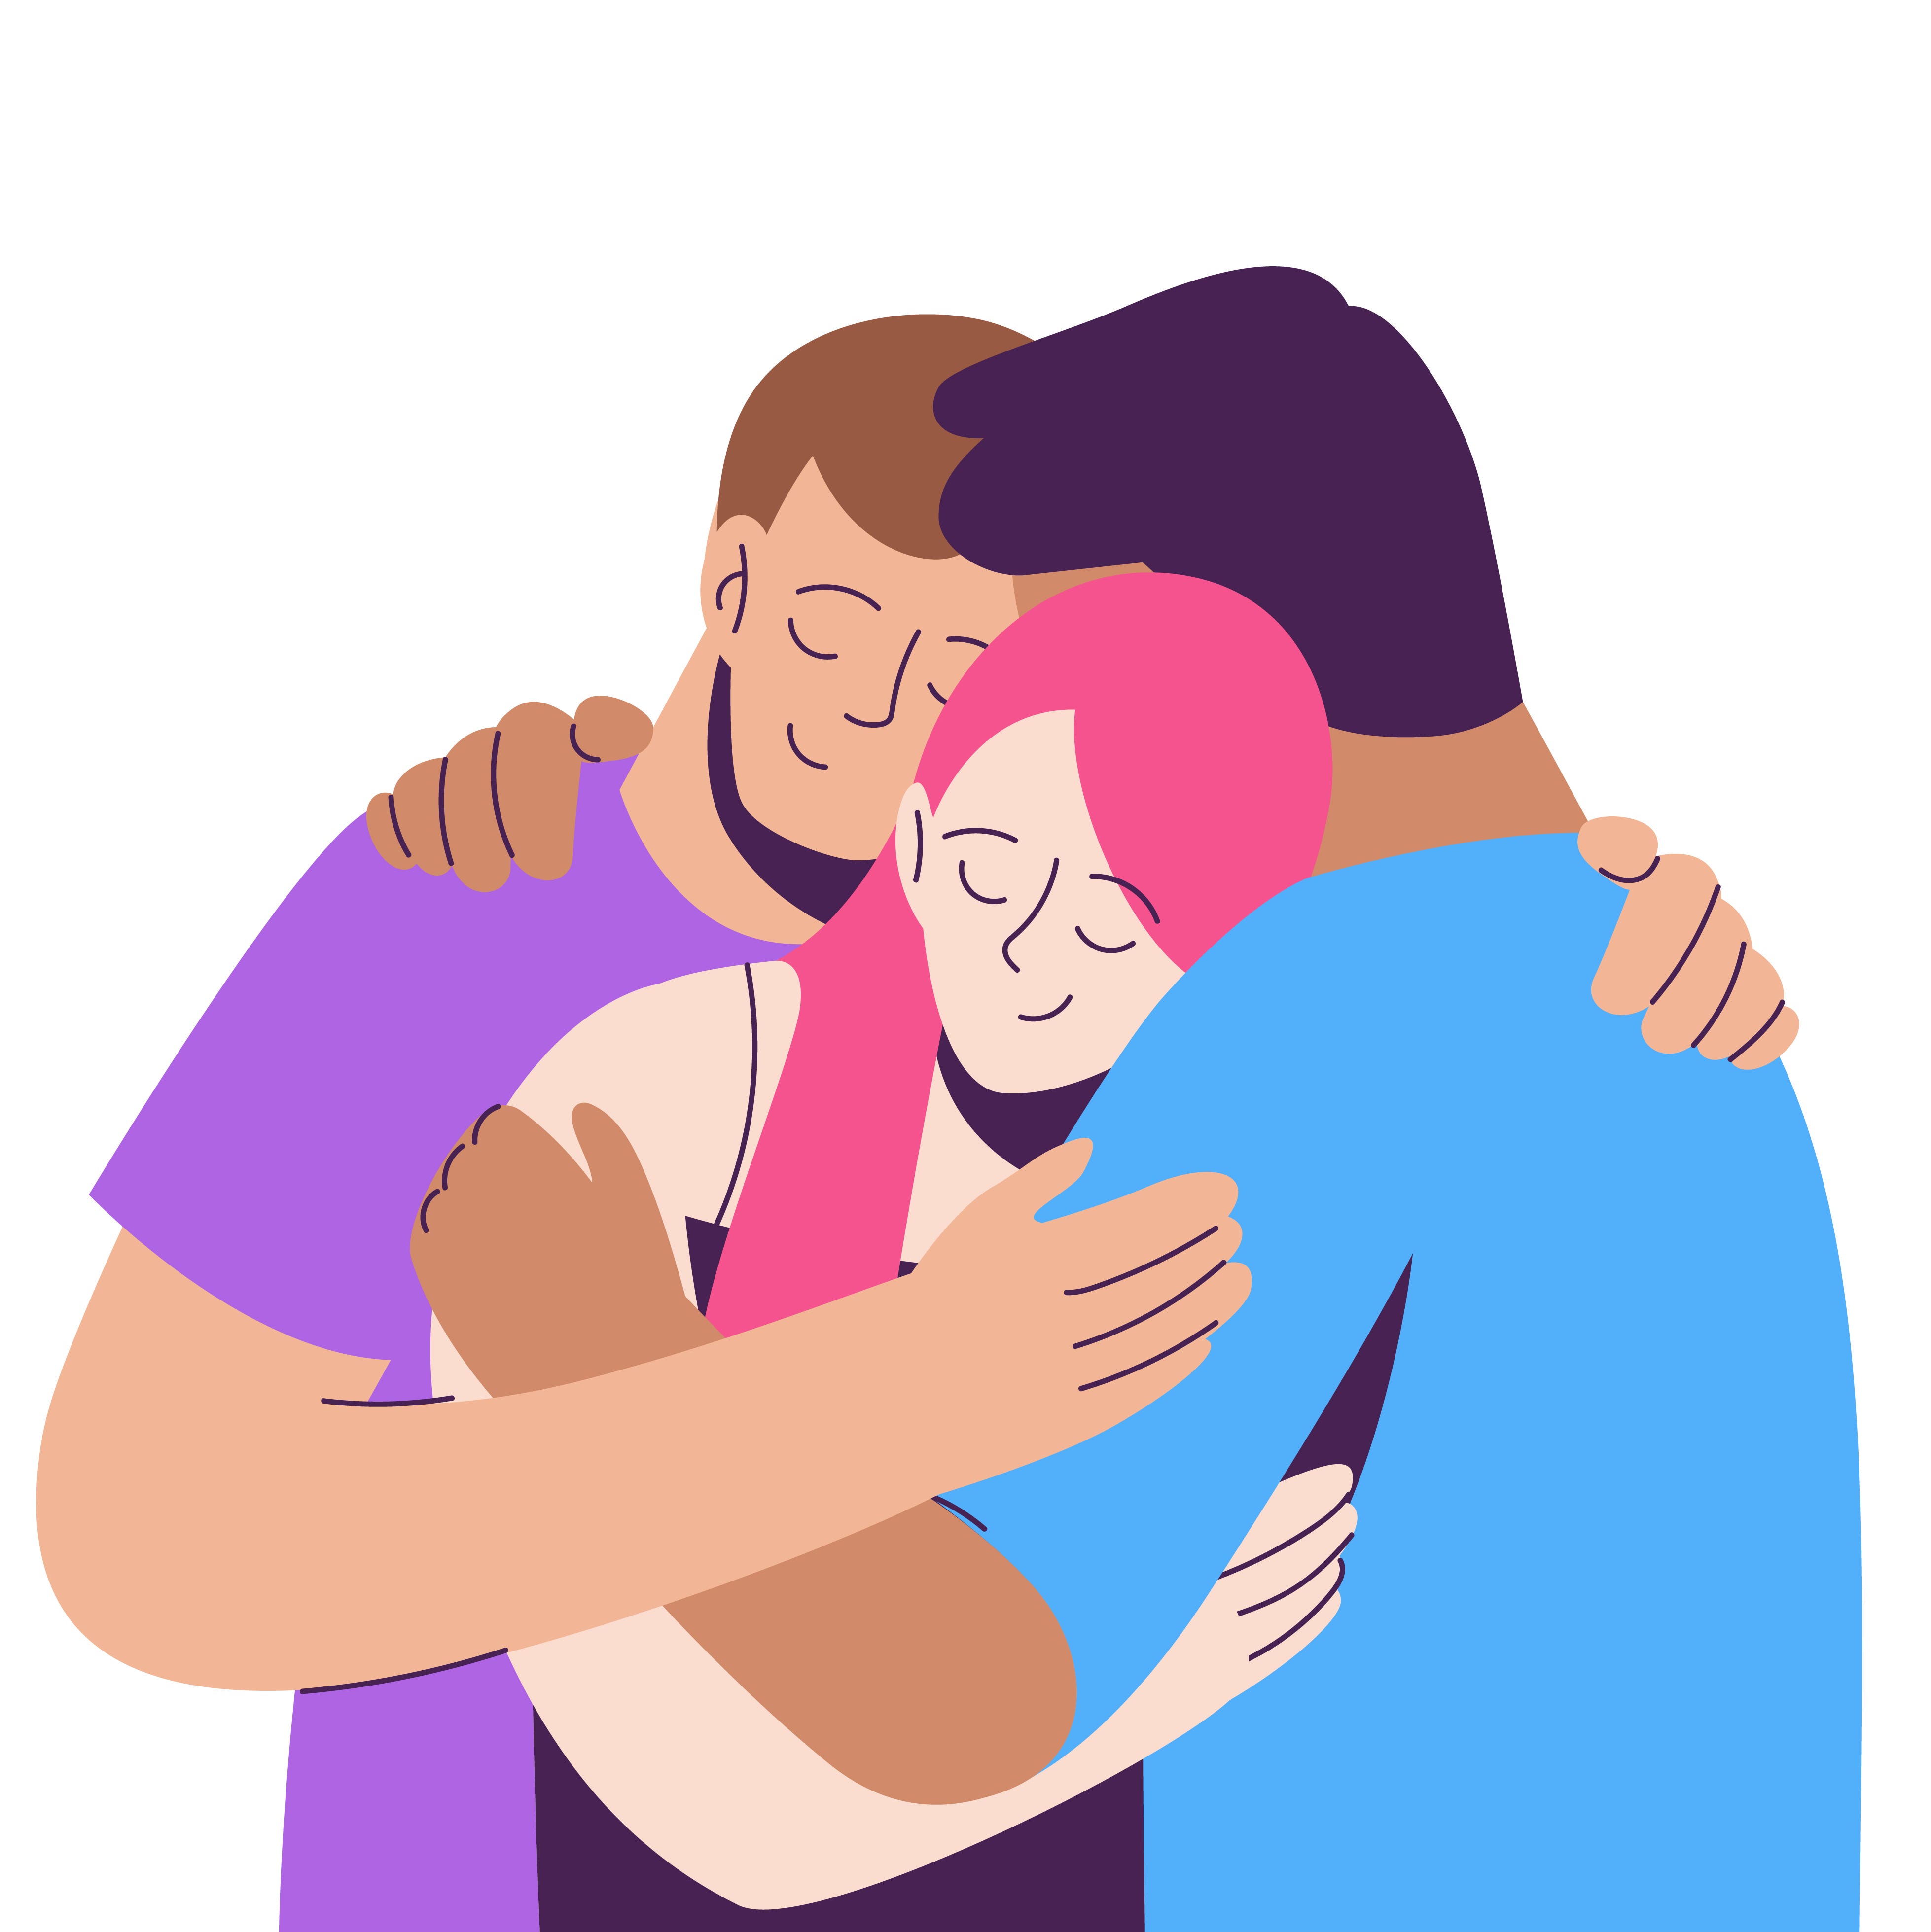 three diversity characters hug polyamory concept 2 guys, 1 girl notions of polygamy, open intimate, romantic and sexual relations, free love ethical non monogamy